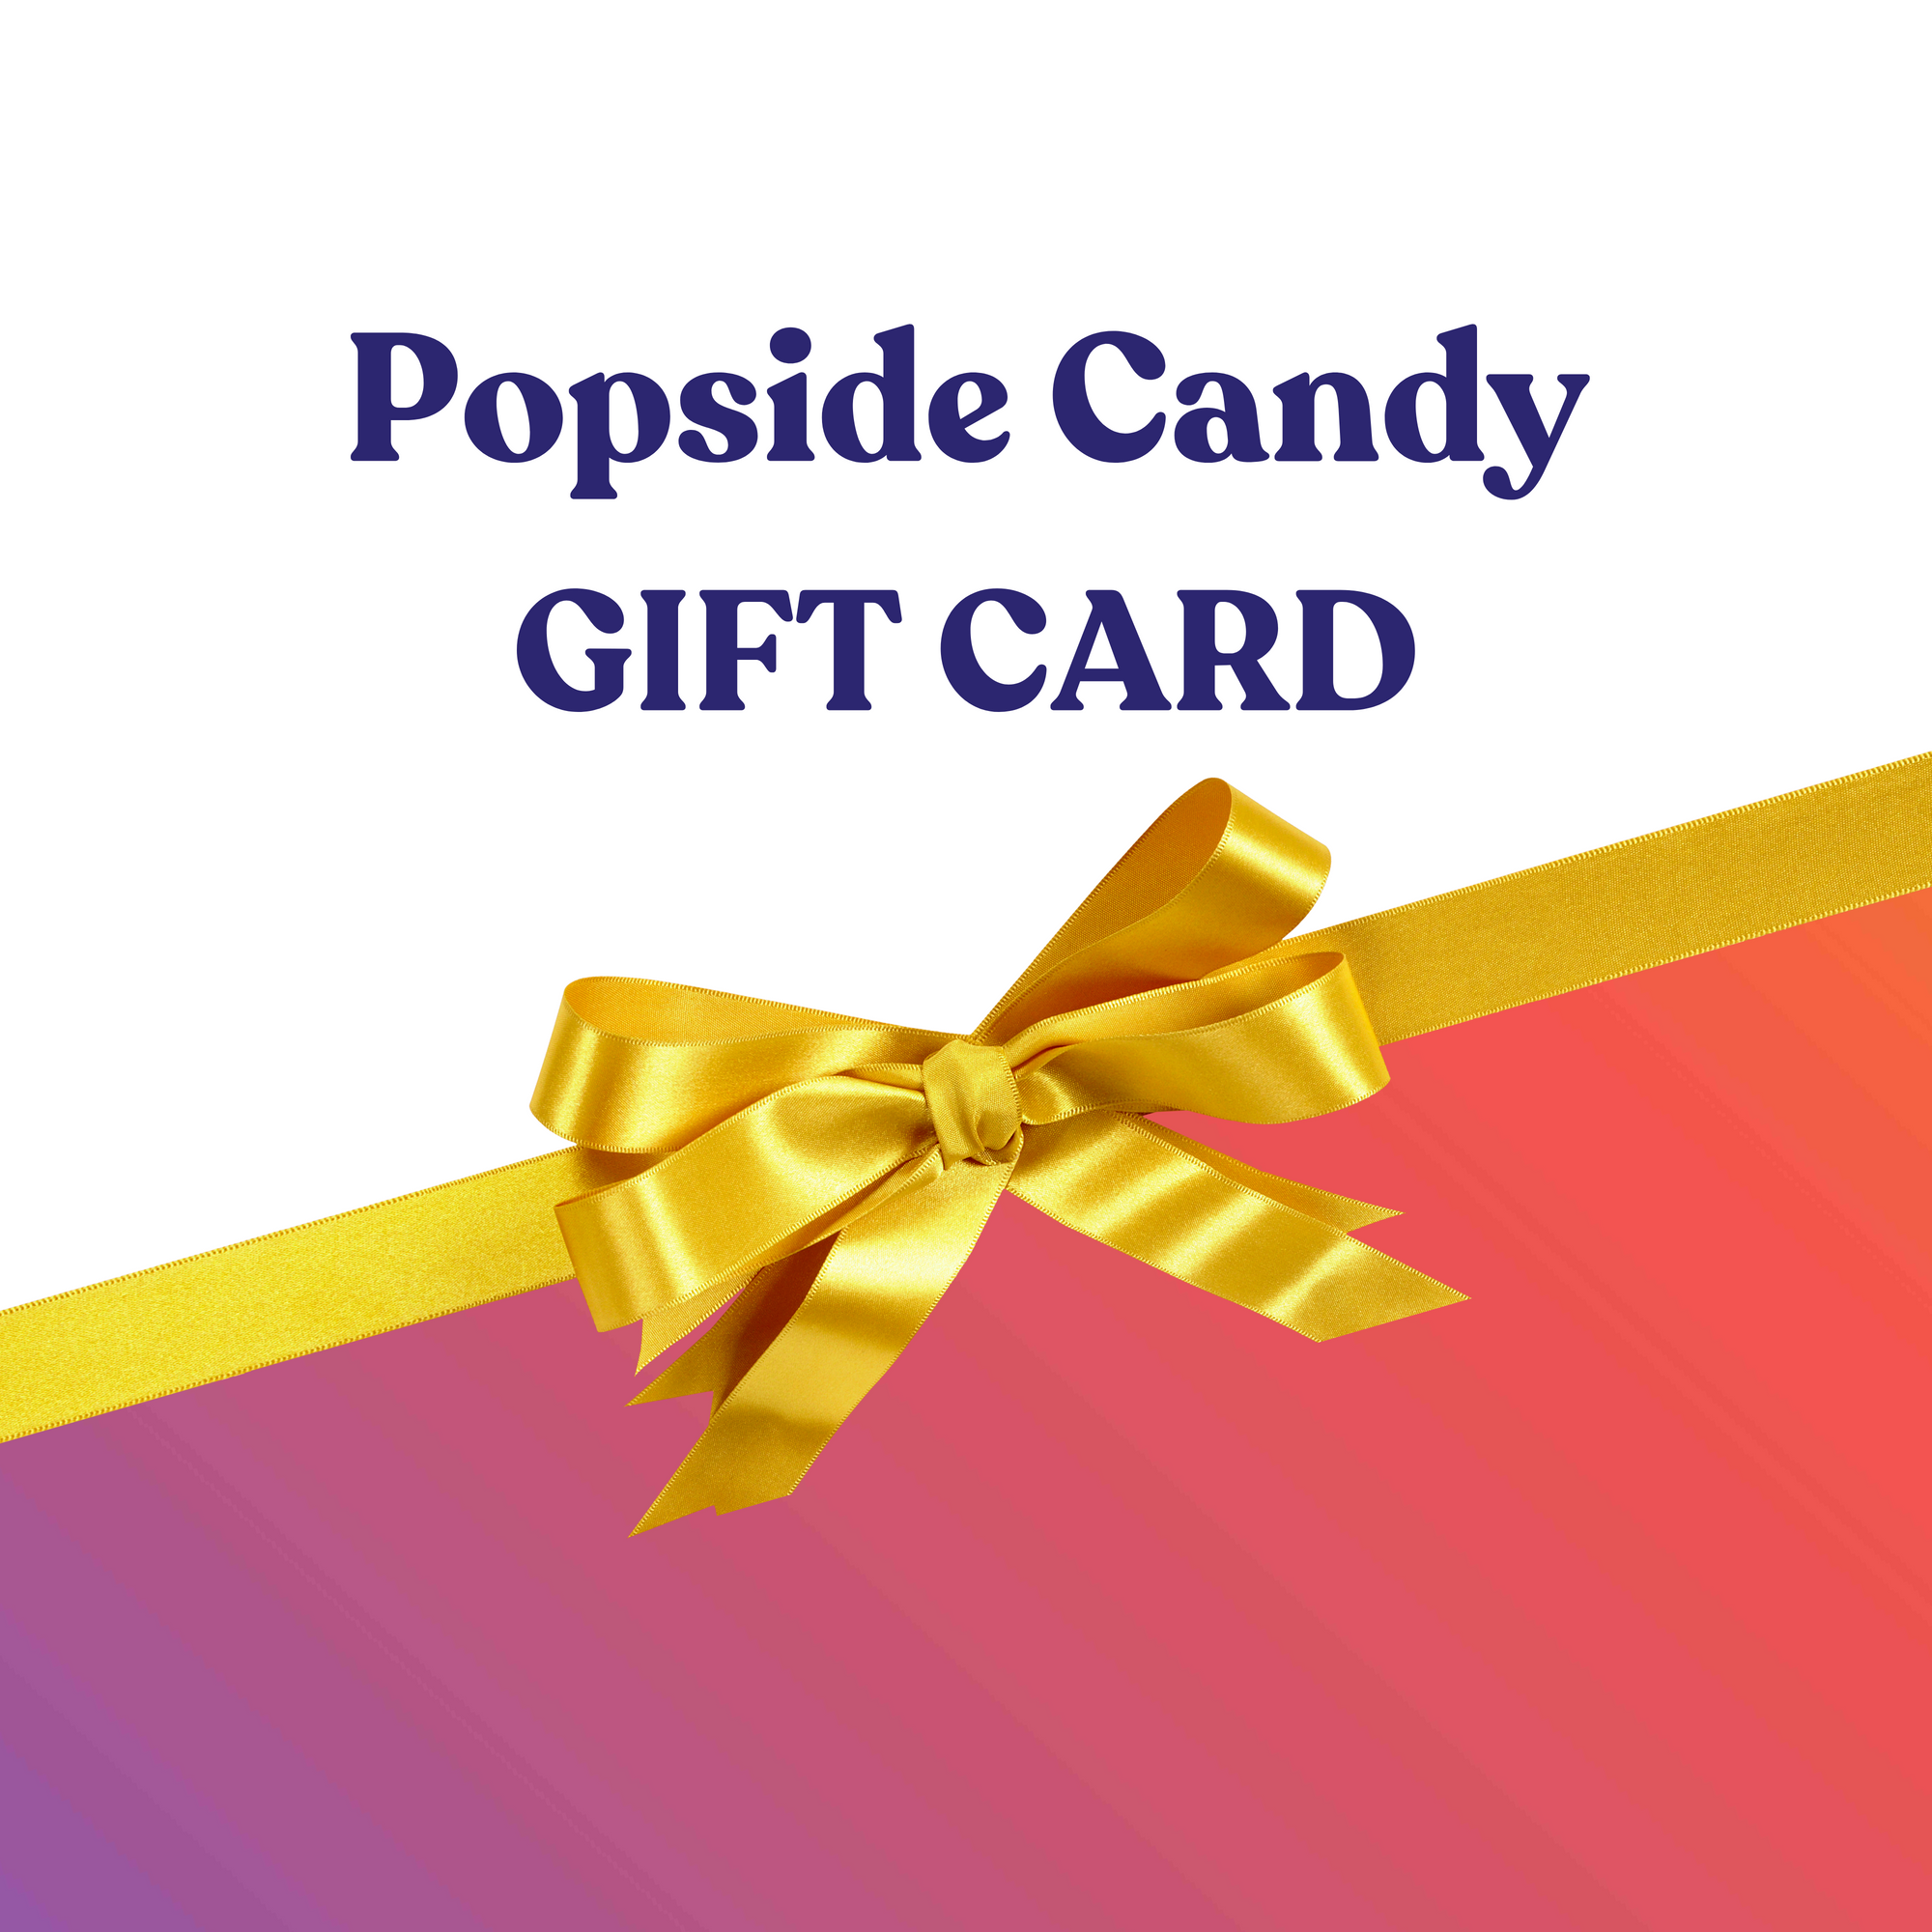 Popside Candy gift card graphic with yellow bow